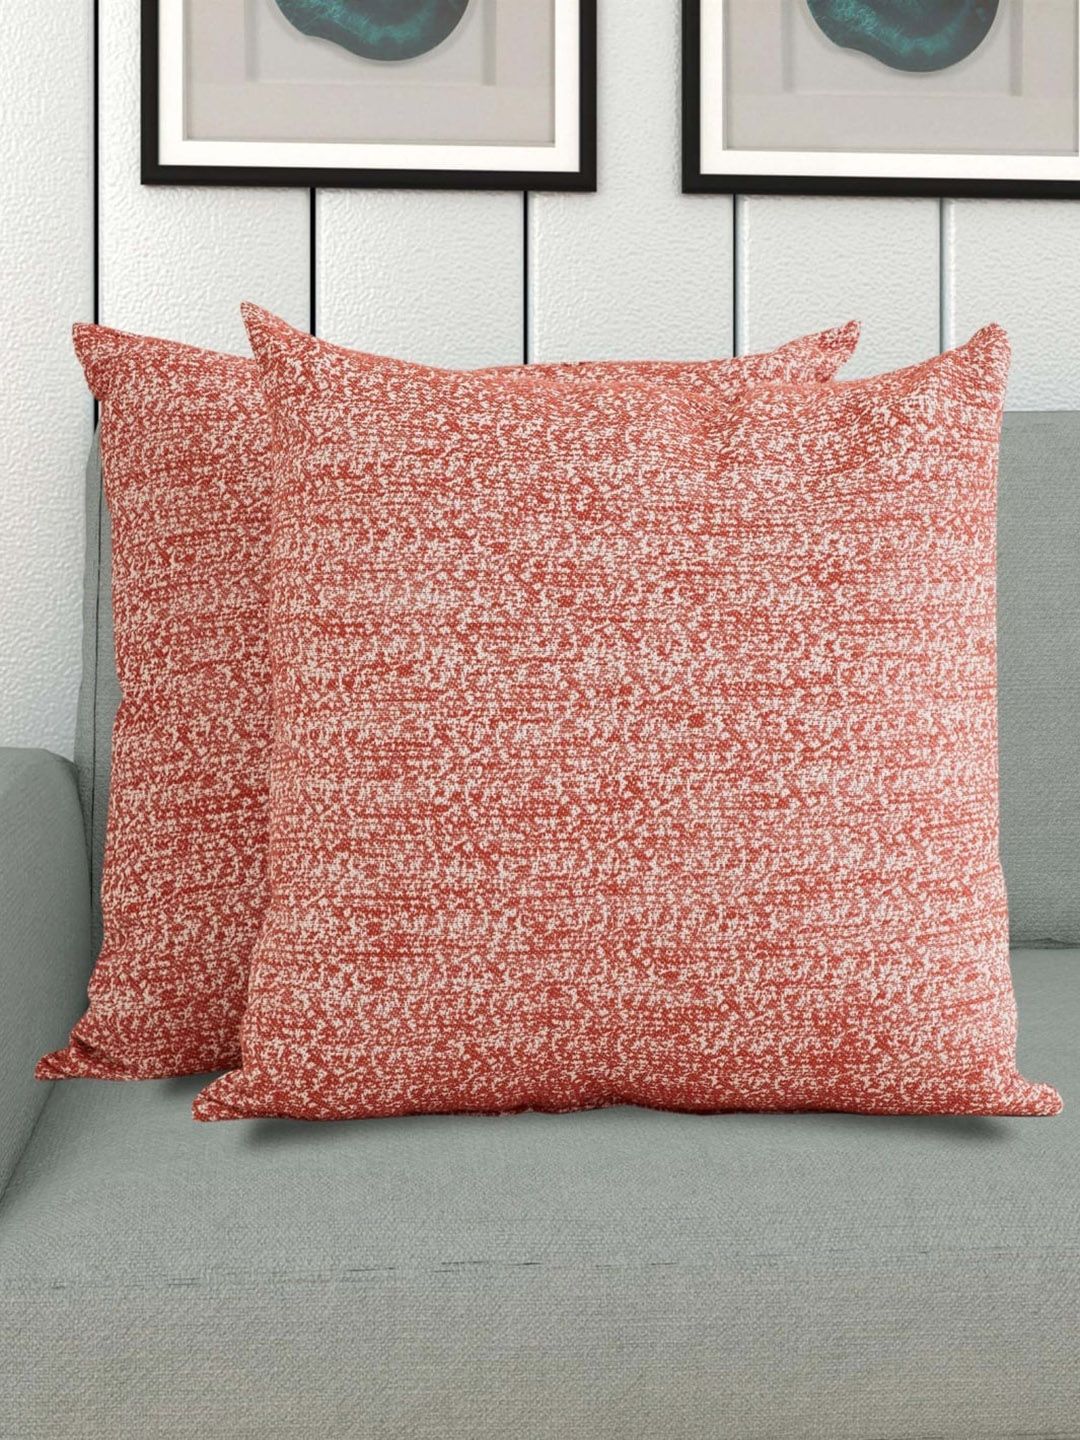 Home Centre Set Of 2 Red & White Slub Textured Yarn-Dyed Cotton Square Floor Cushions Price in India